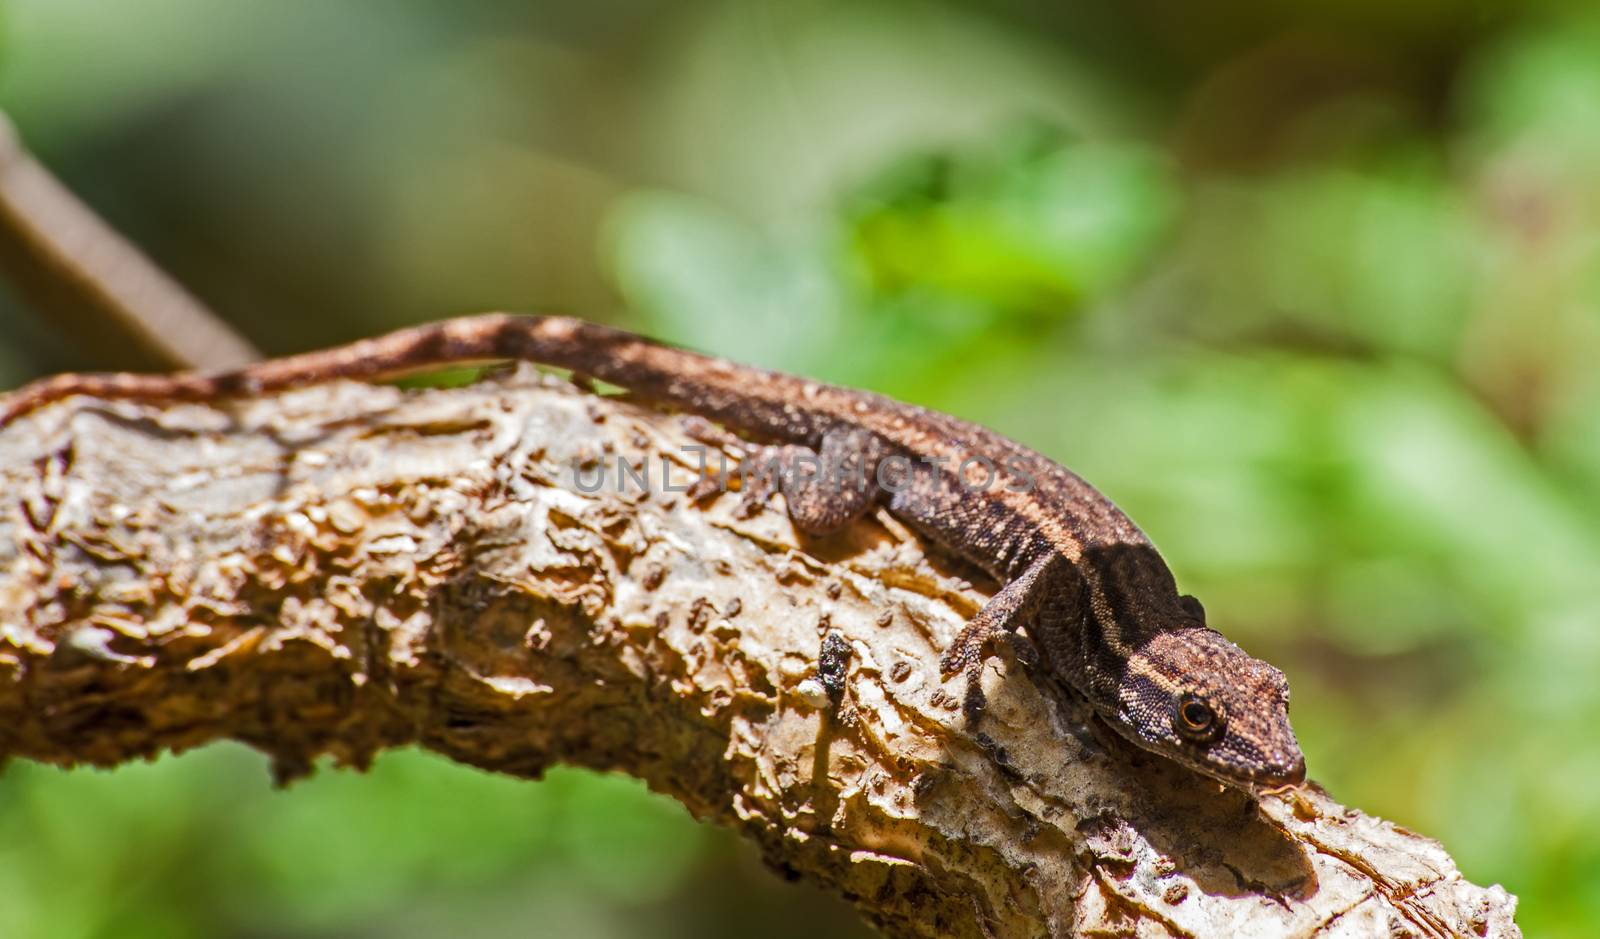 Cape Dwarf Gecko (Lygodactylus capensis), endemic to Southern Africa.